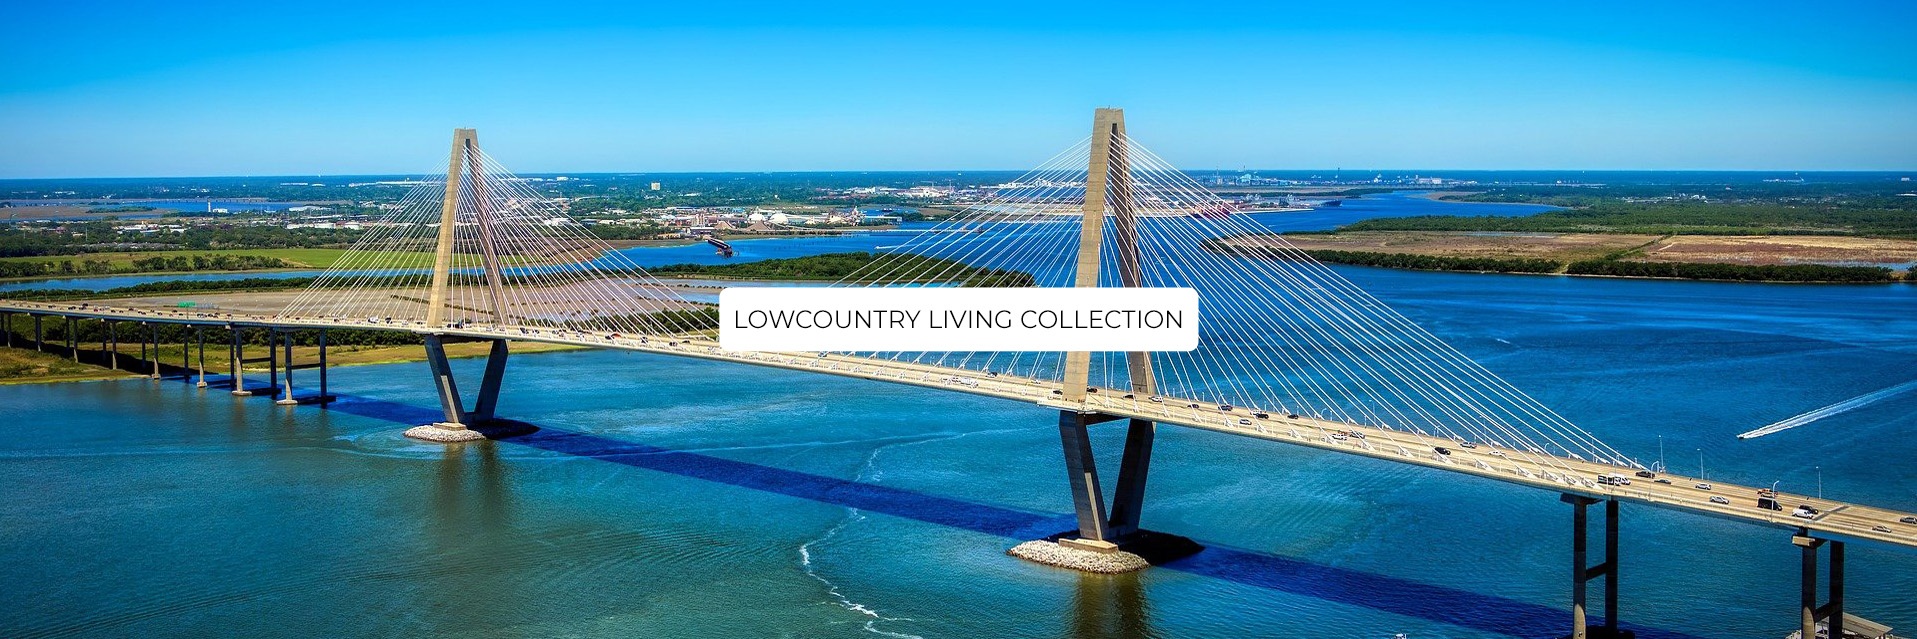 Lowcountry Living Cover